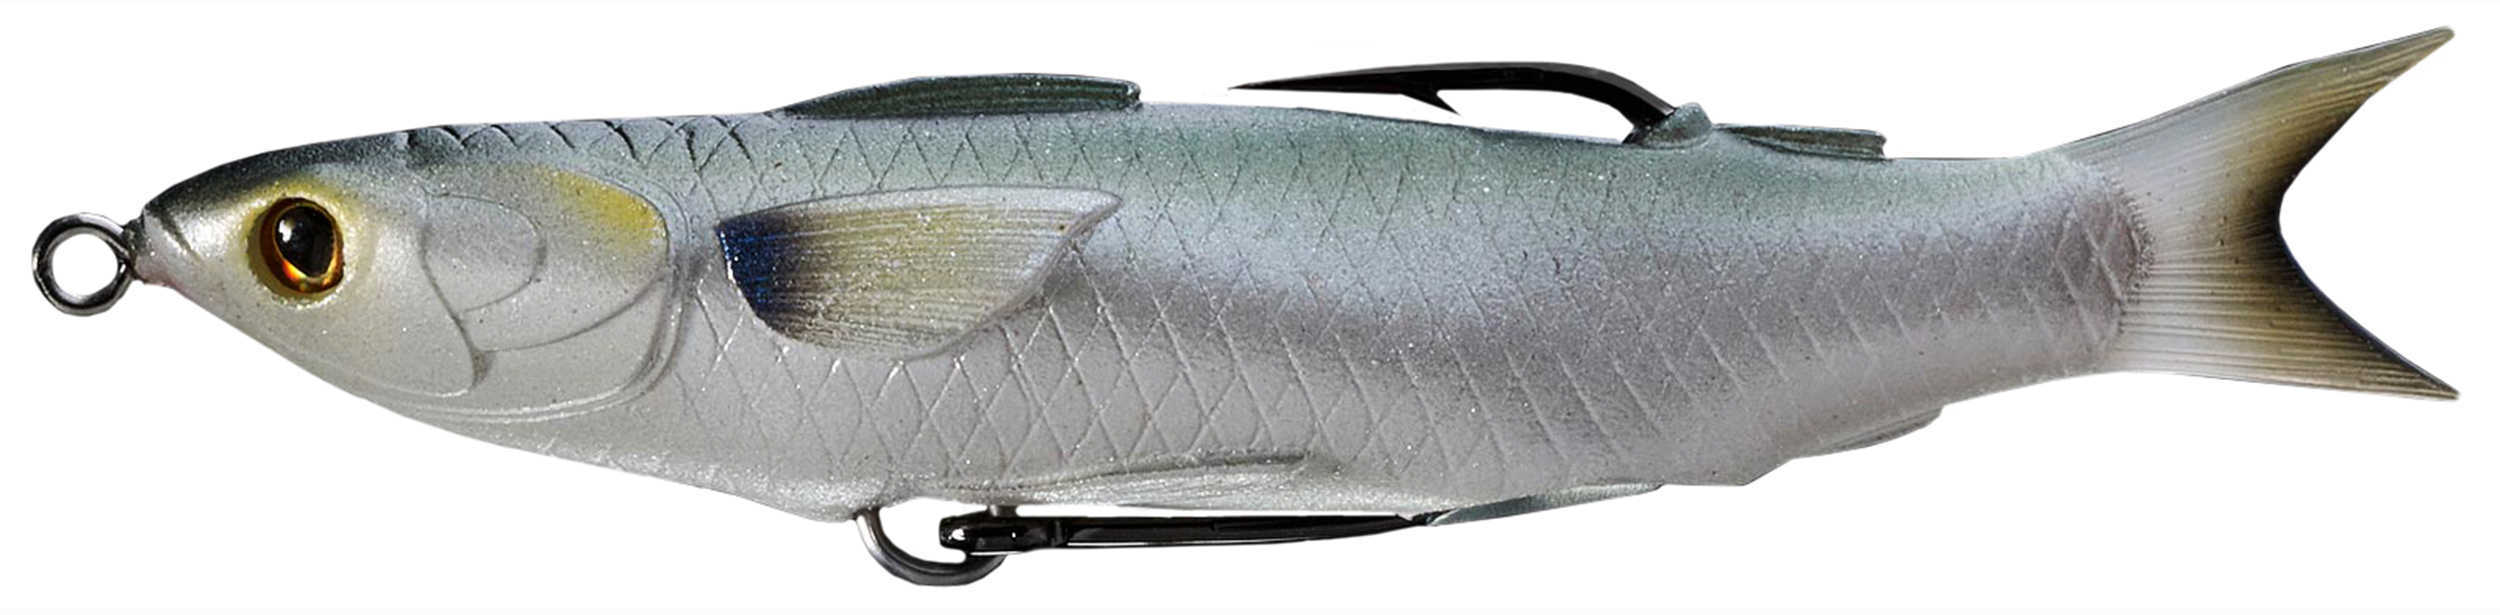 LiveTarget Lures Mullet Hollow Body Lure Saltwater, 4 1/2" Length, 1/2 oz, Surface Depth, Silver. Per 1 Md: MUH115T716